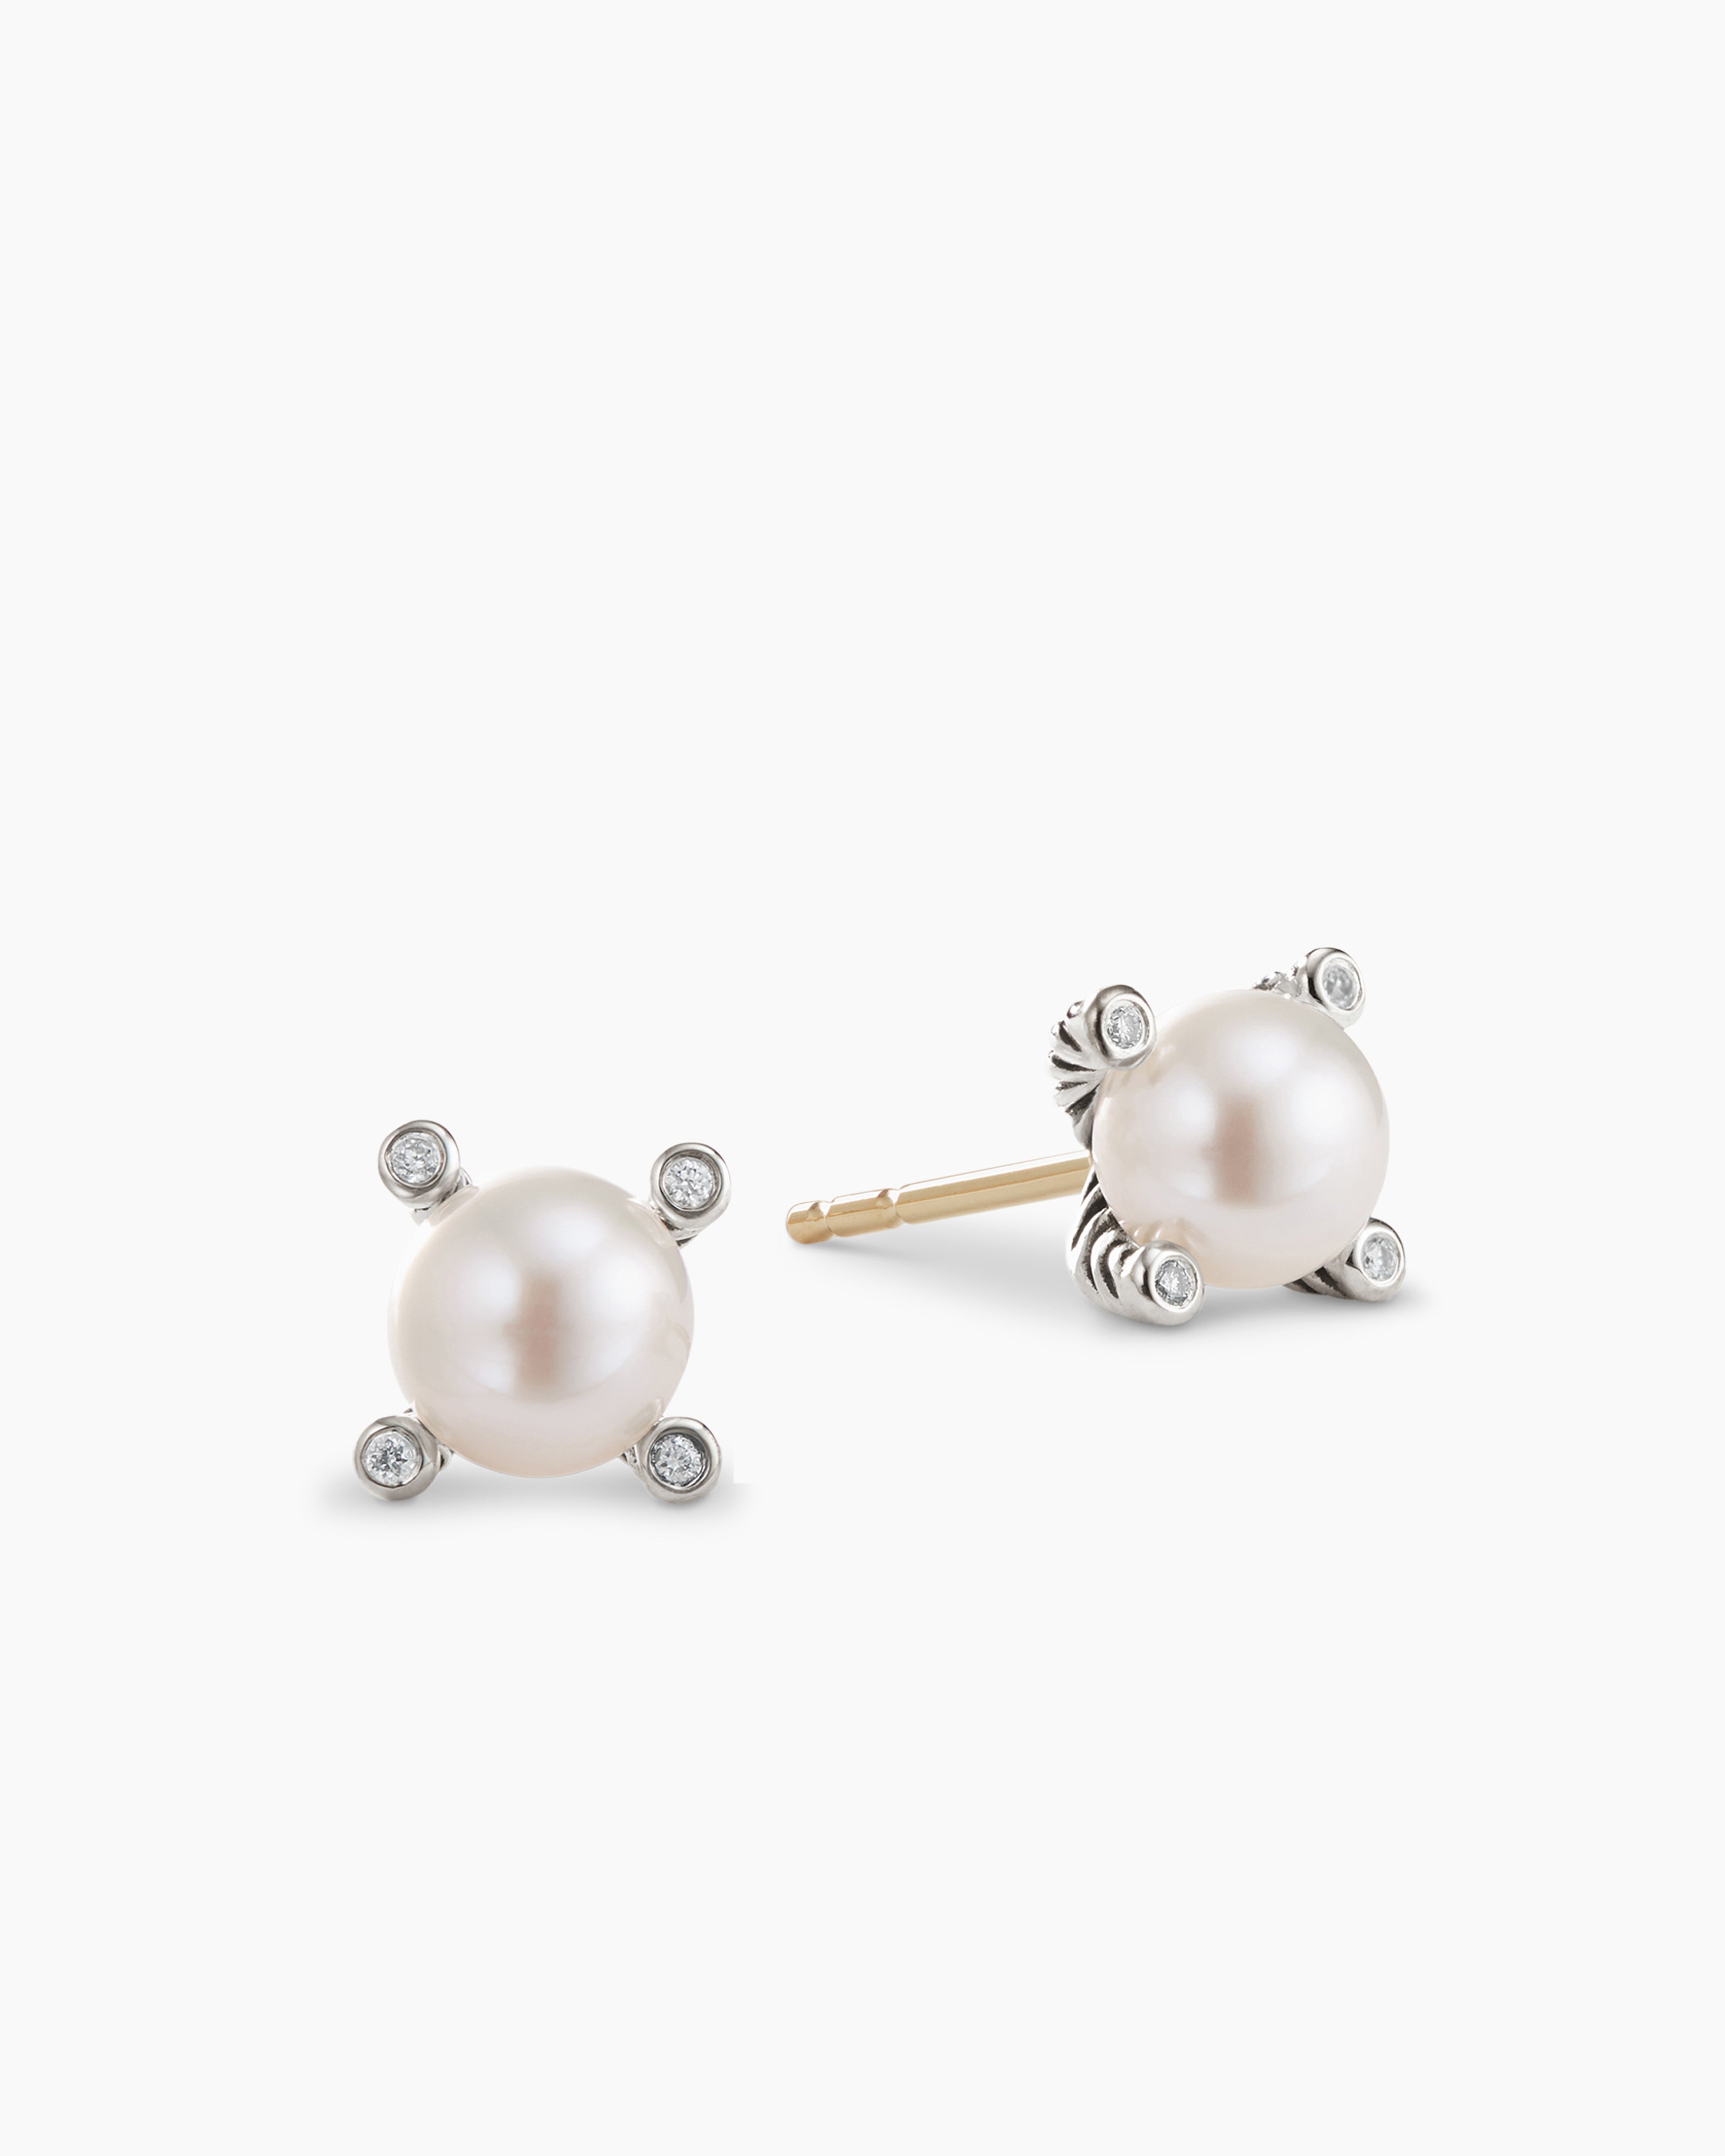 Pearl Stud Earrings in Sterling Silver with Pearls and Diamonds, 7.4mm |  David Yurman